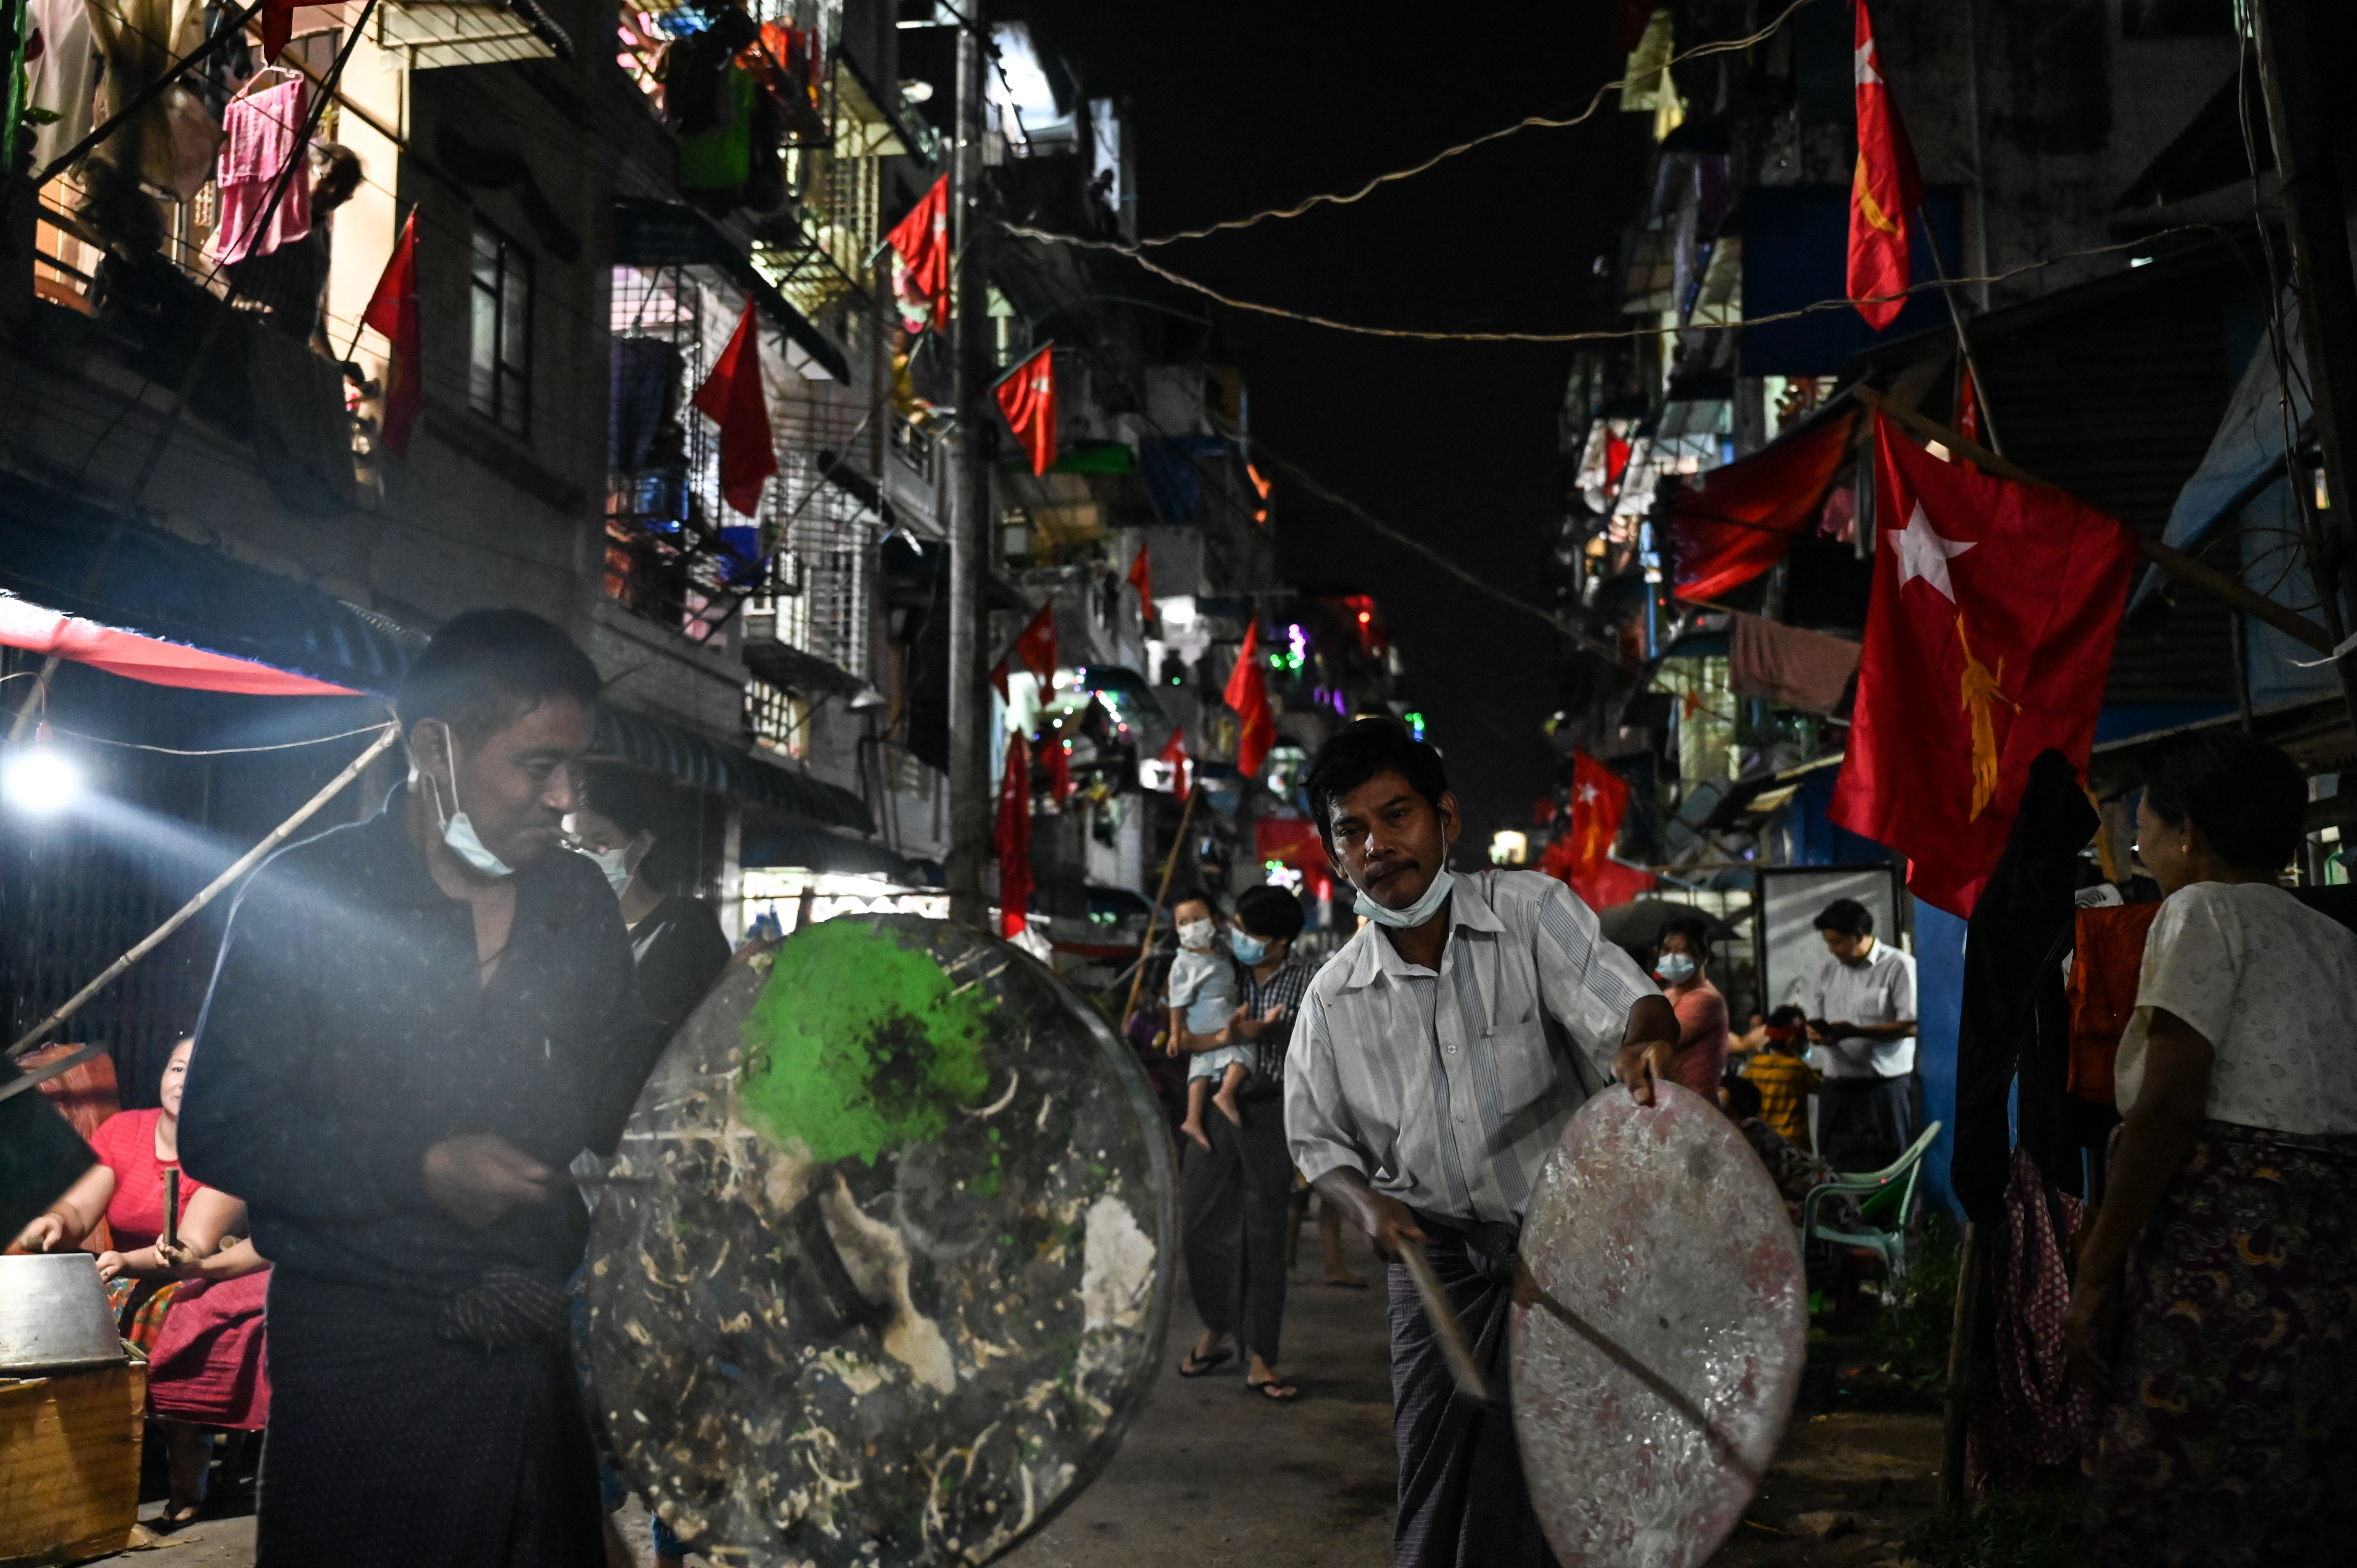 Residents take part in a noise campaign on a street in Yangon. PHOTO: AFP